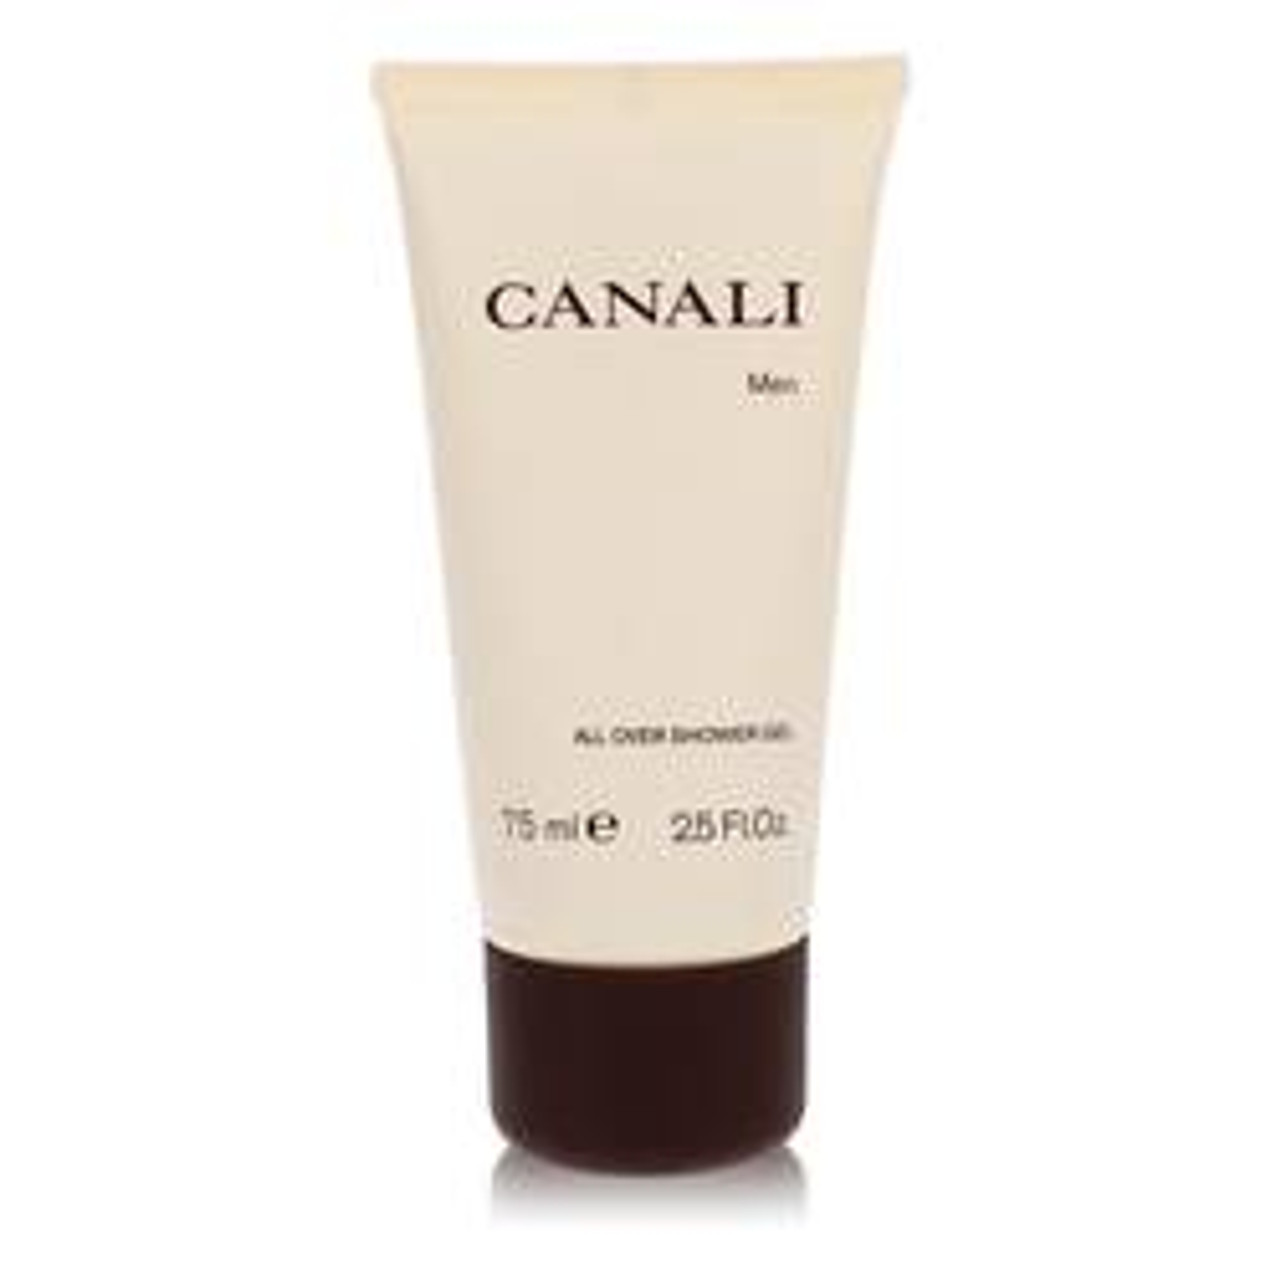 Canali Cologne By Canali Shower Gel 2.5 oz for Men - [From 15.00 - Choose pk Qty ] - *Ships from Miami